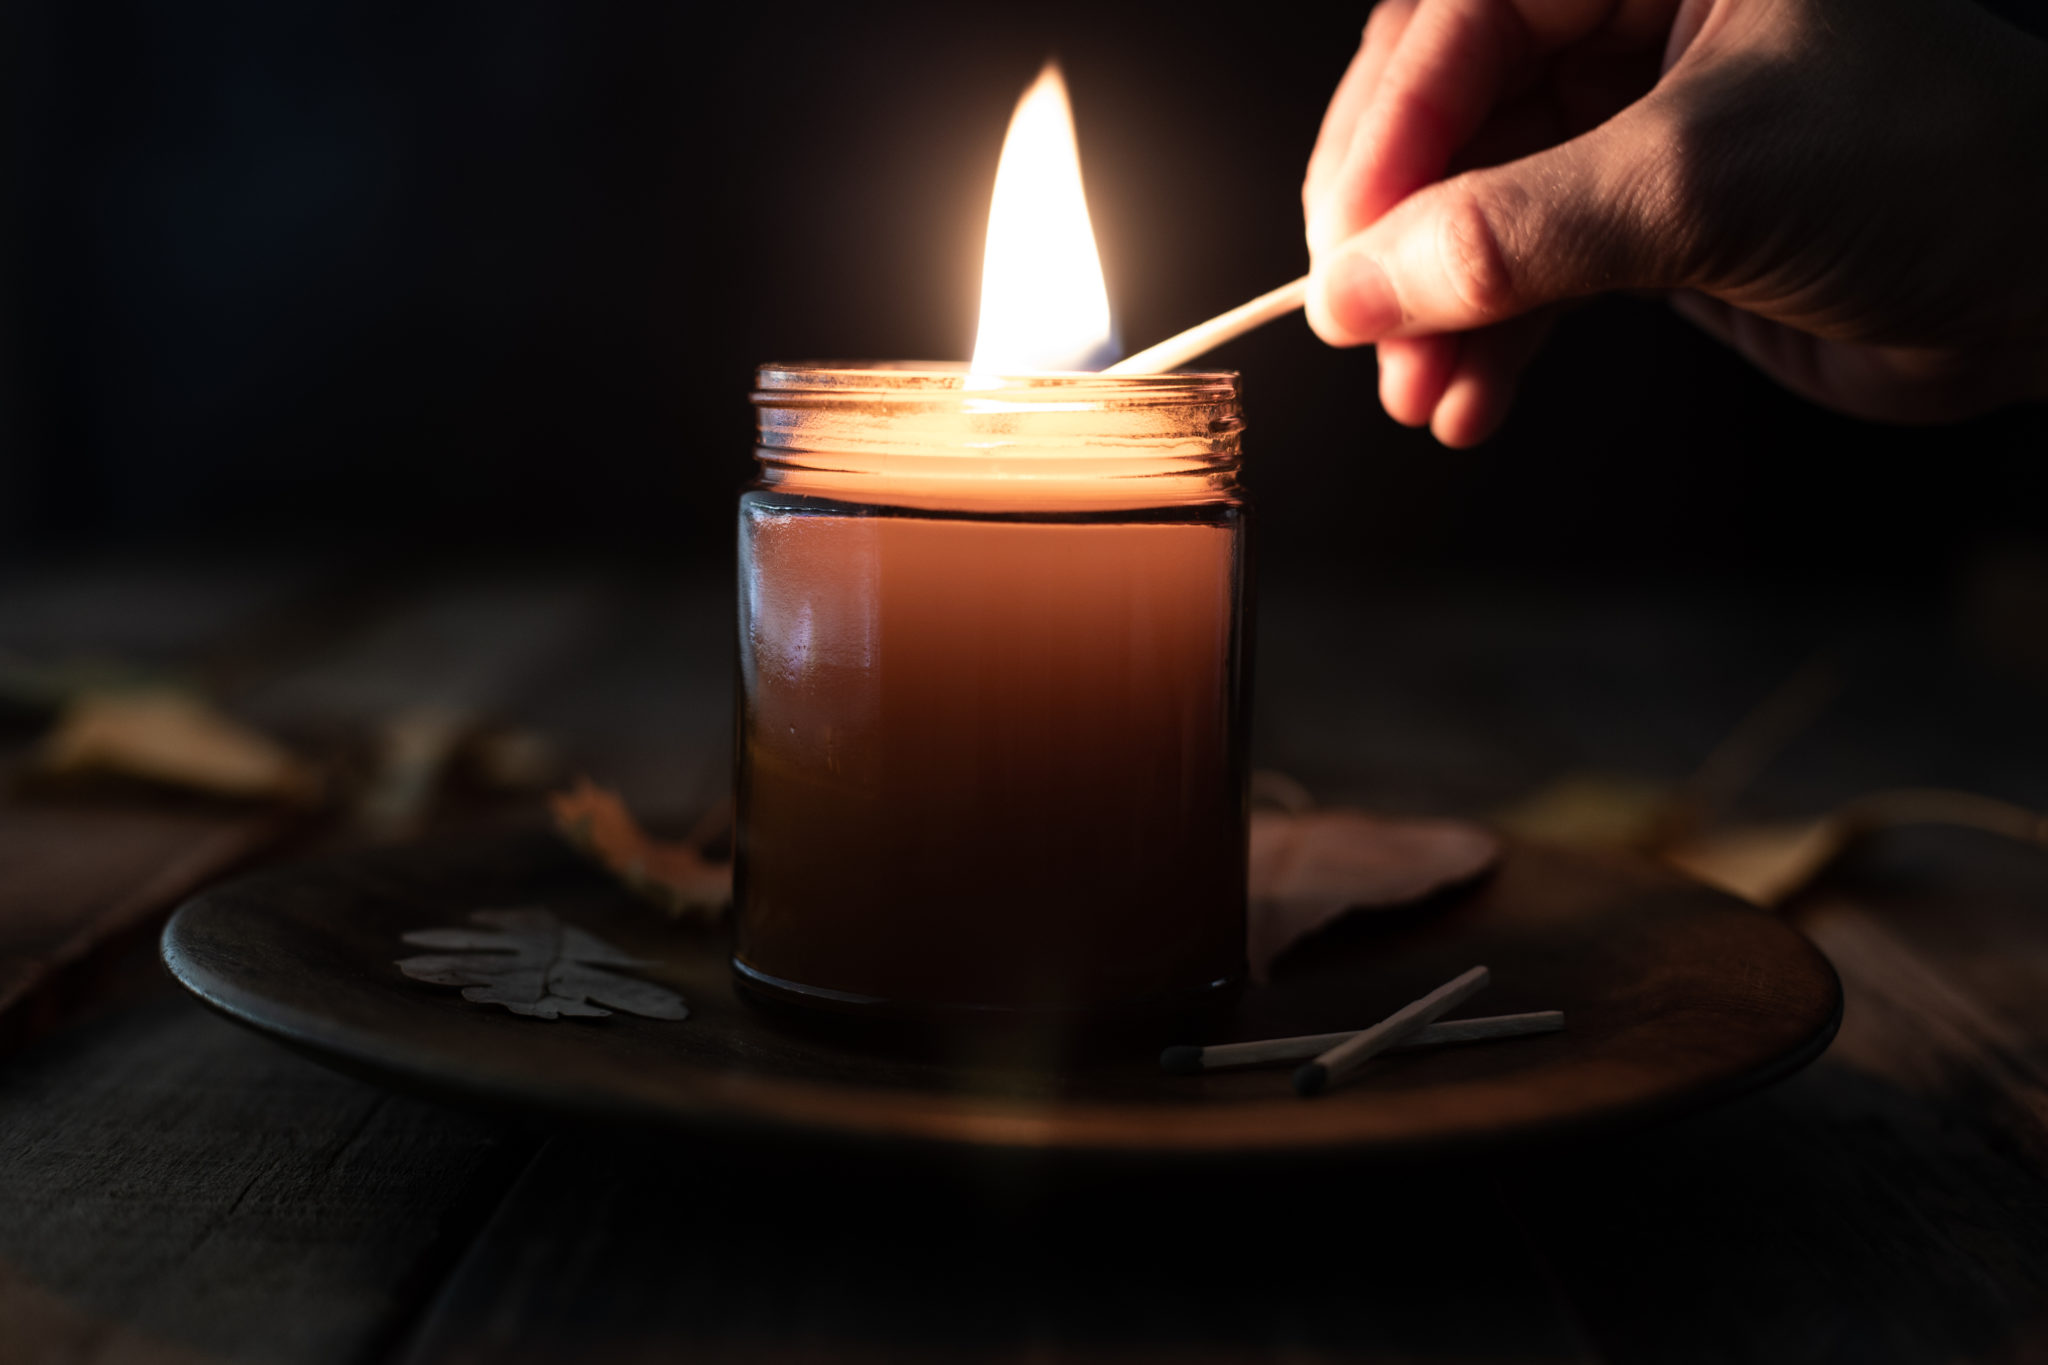 Fire Safety Tips to Follow During Power Outages - National Candle  Association